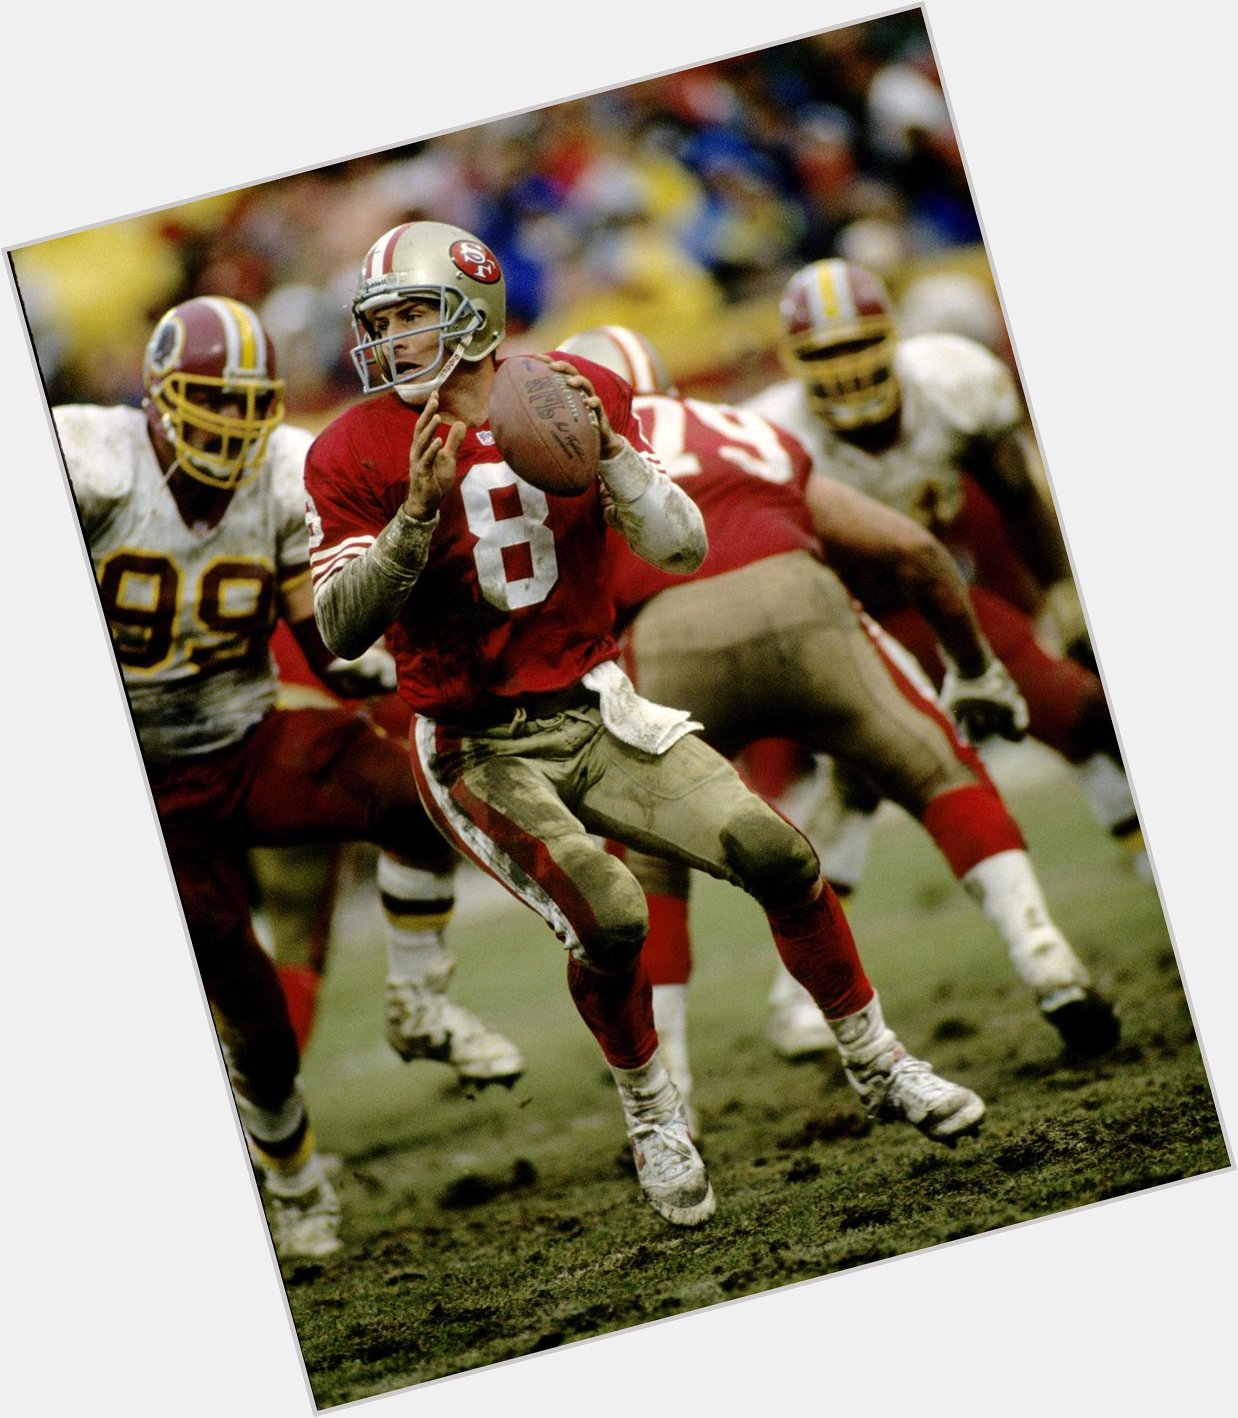 Happy BDay to lifetime member and Hall of Famer Steve Young! 